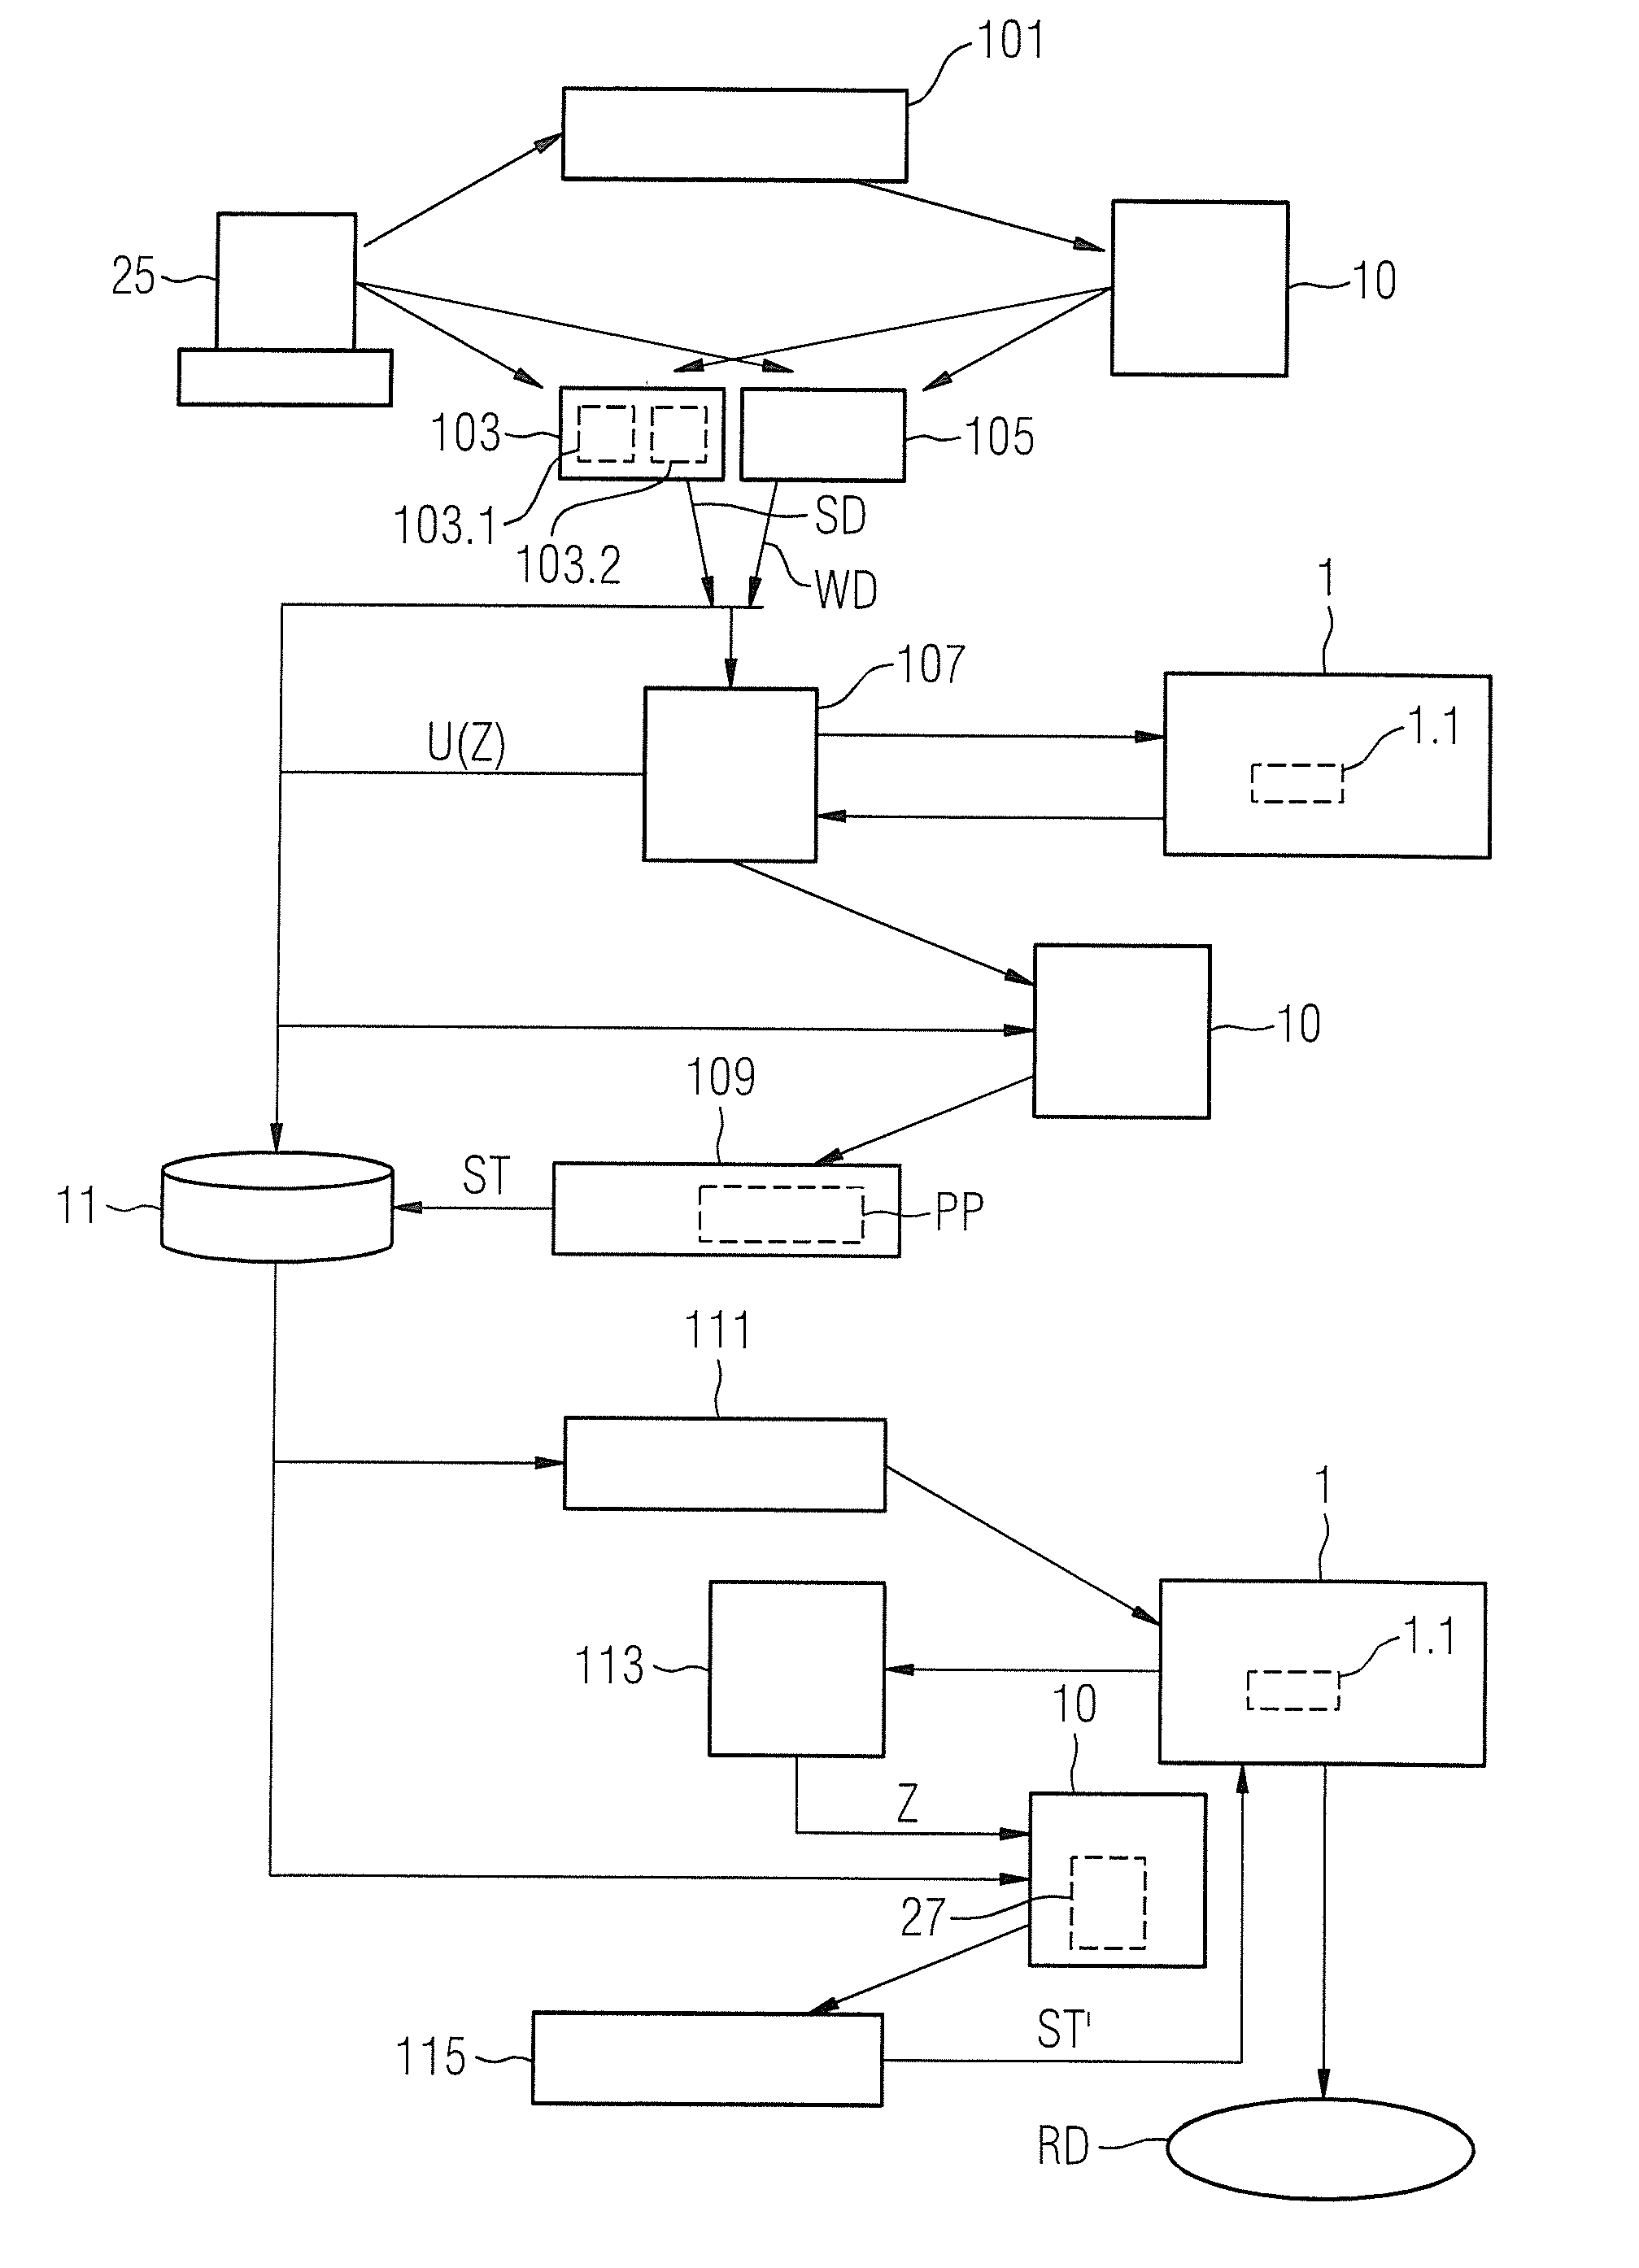 Medical imaging apparatus having multiple subsystems, and operating method therefor